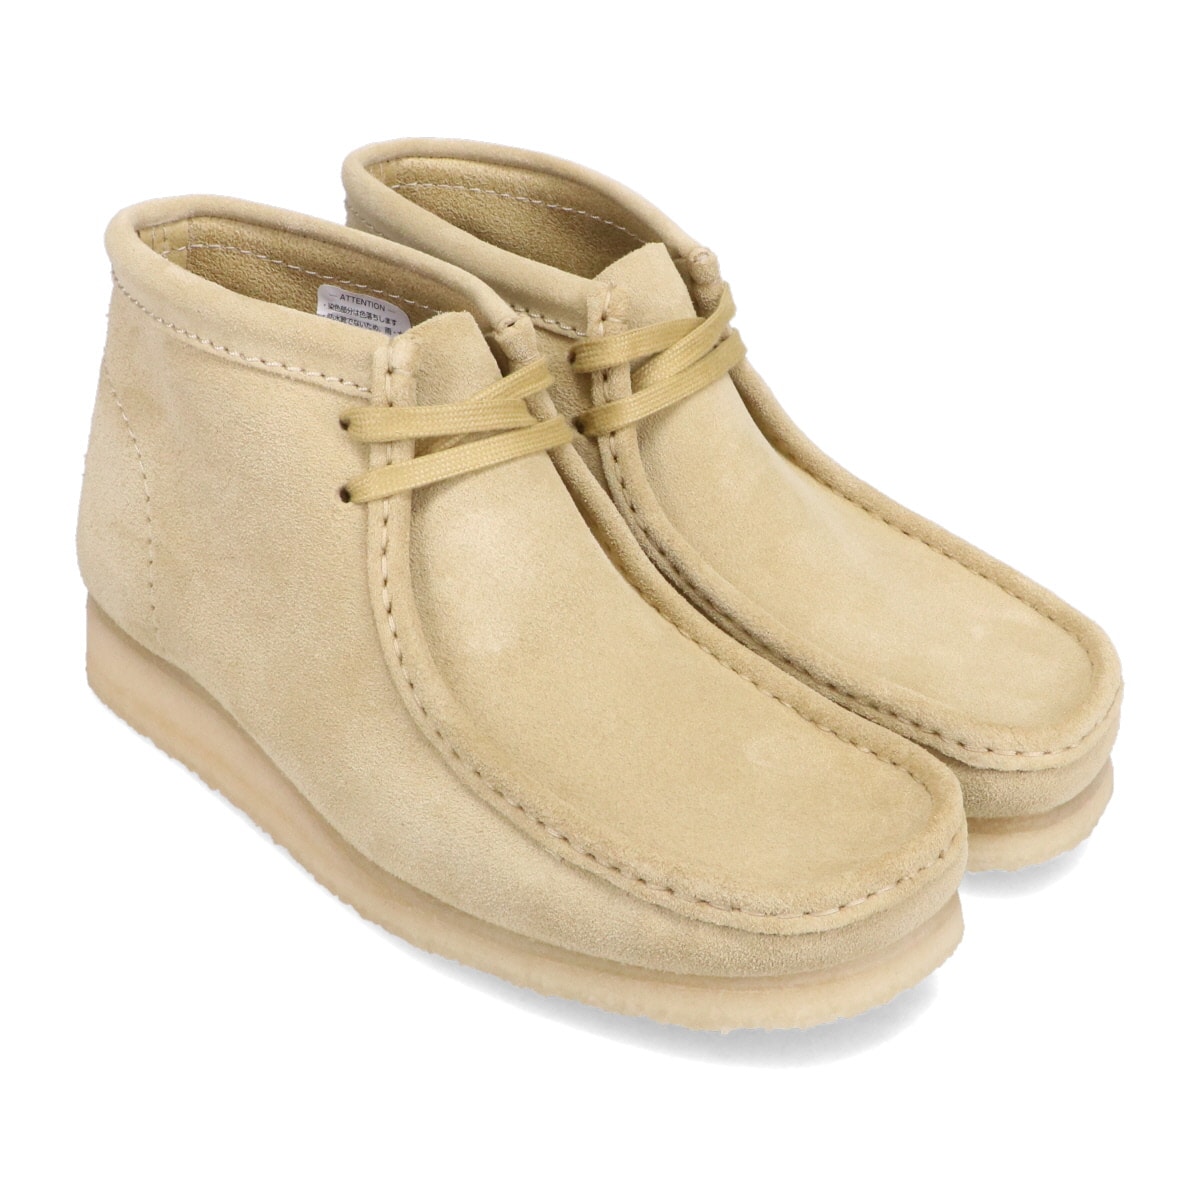 Clarks Wallabee Boot Maple Suede Maple Suede 22SP-I